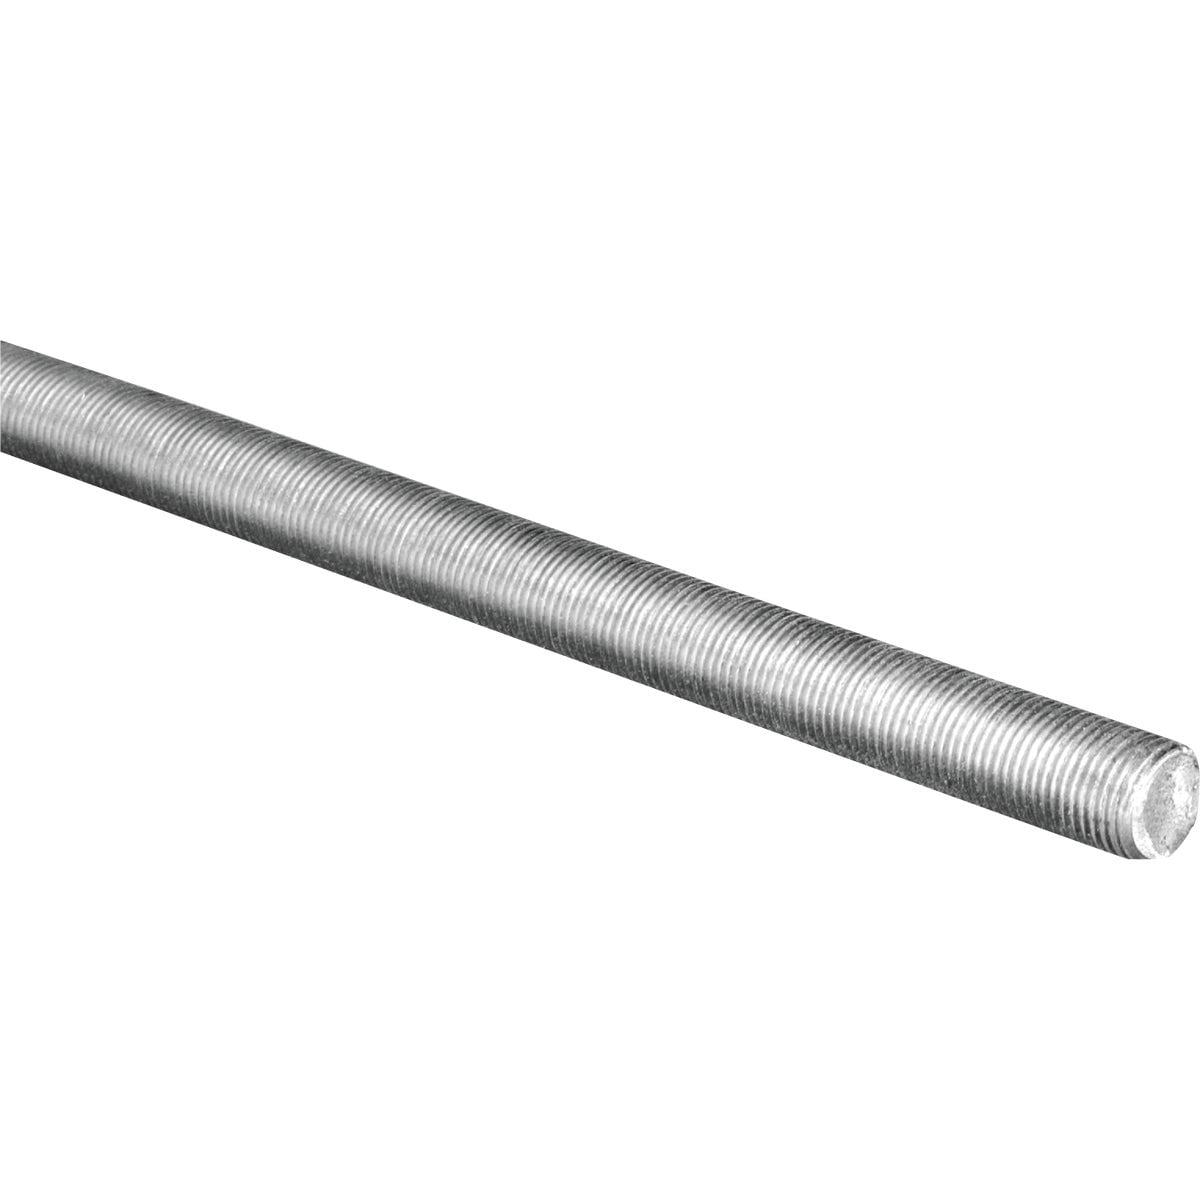 D 10mm x 1.25 HSS Cobalt Right hand Thread Tap M10 x 1.25mm for Stainless Steel 